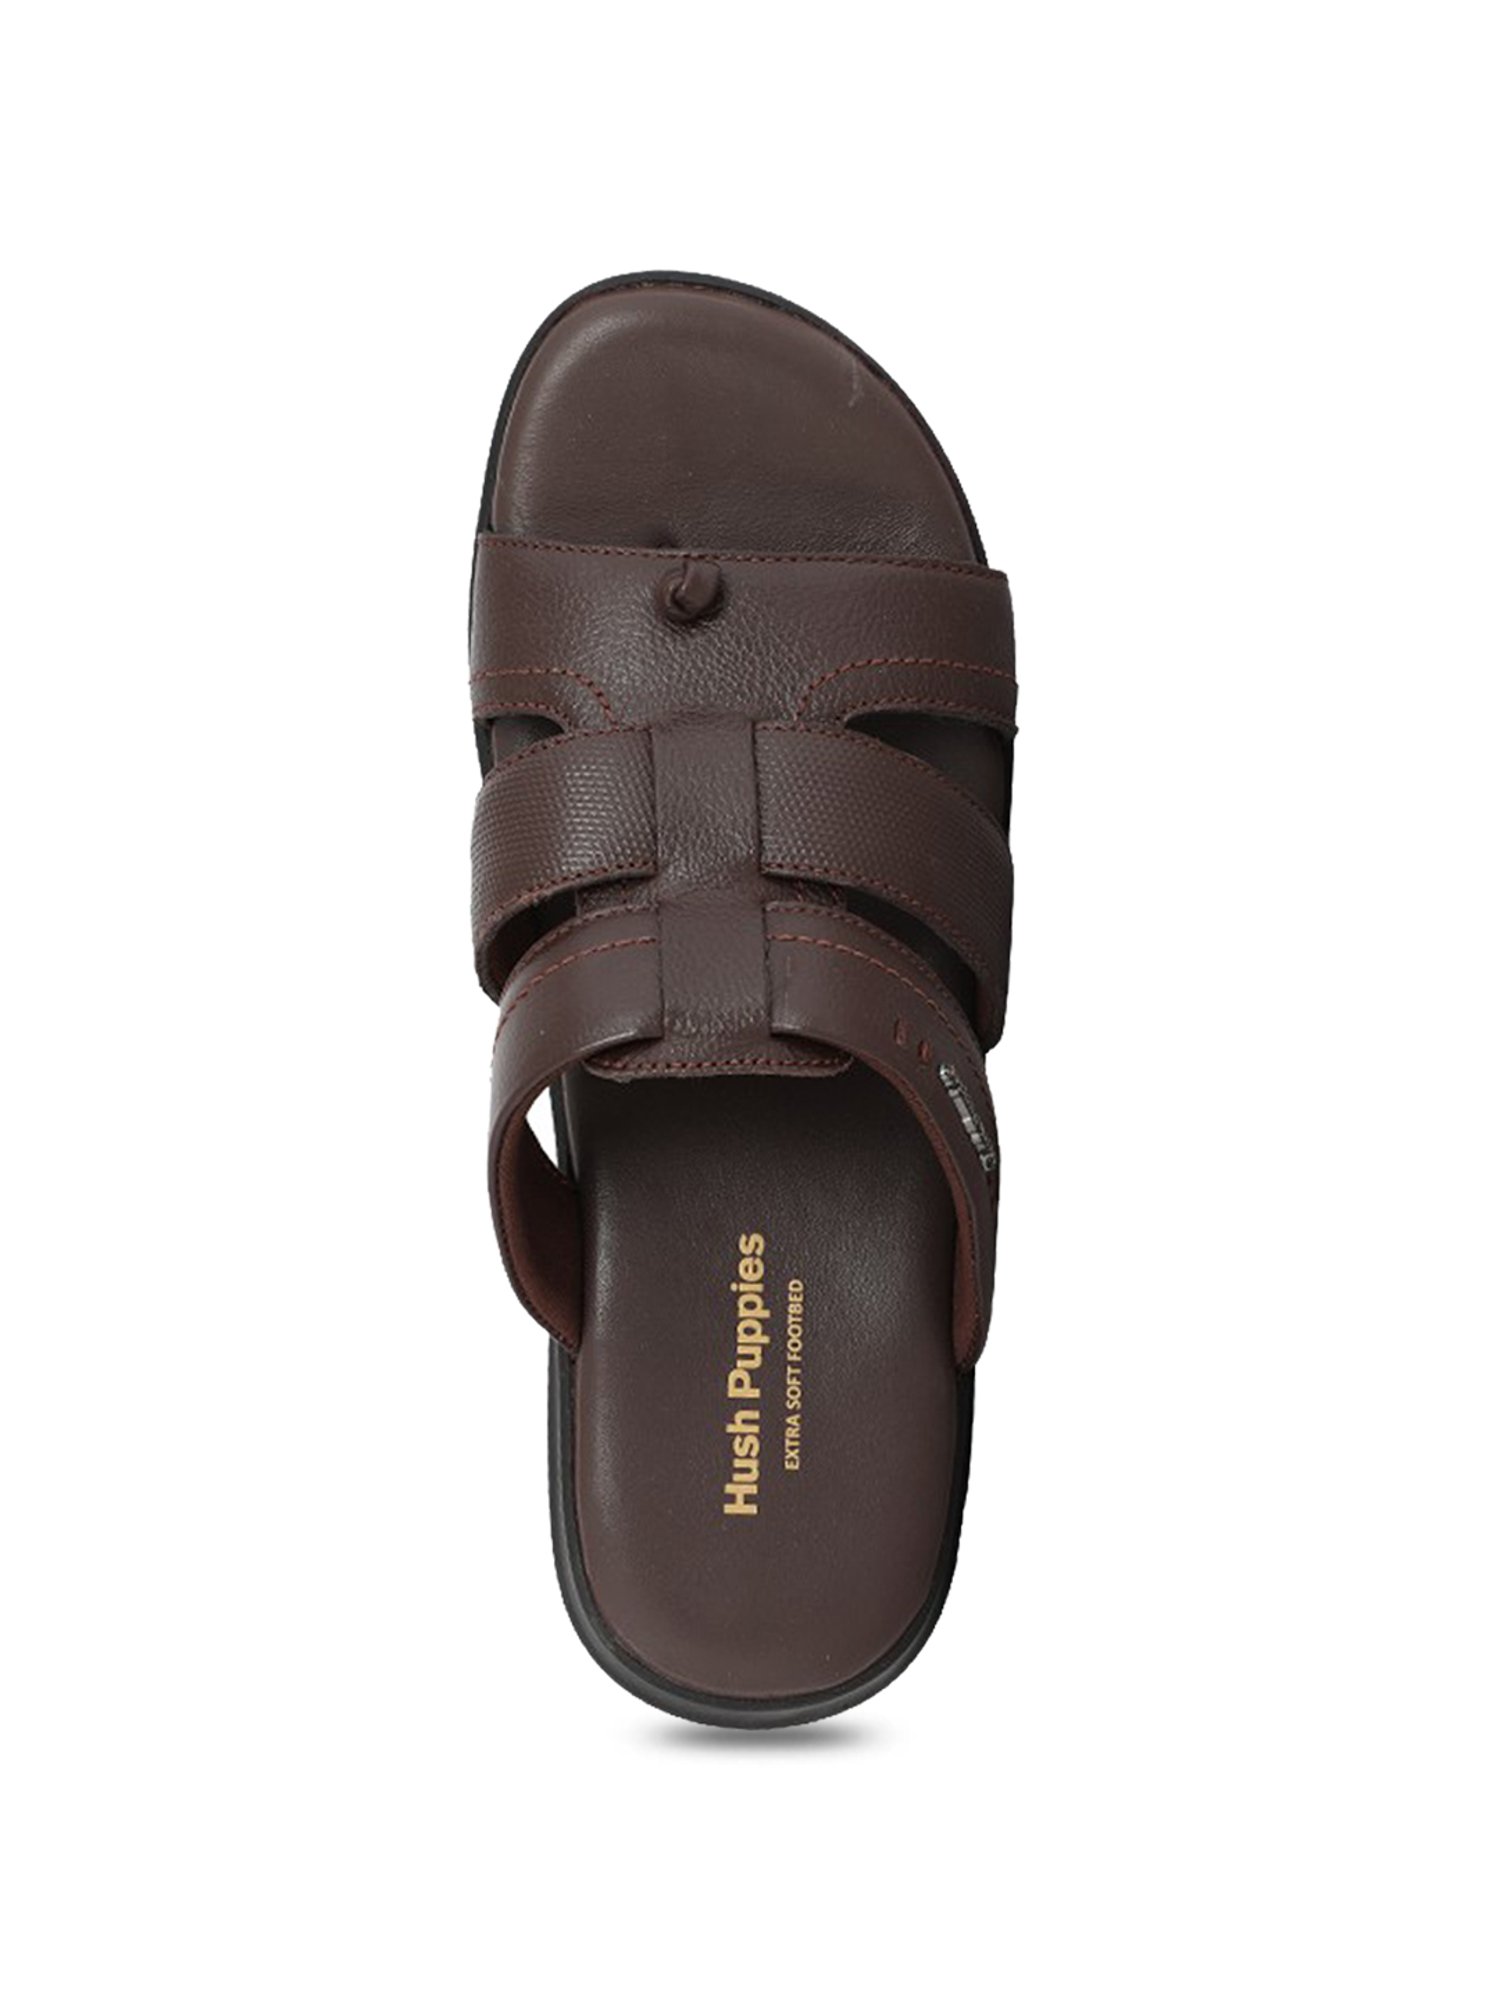 hush puppies extra soft footbed